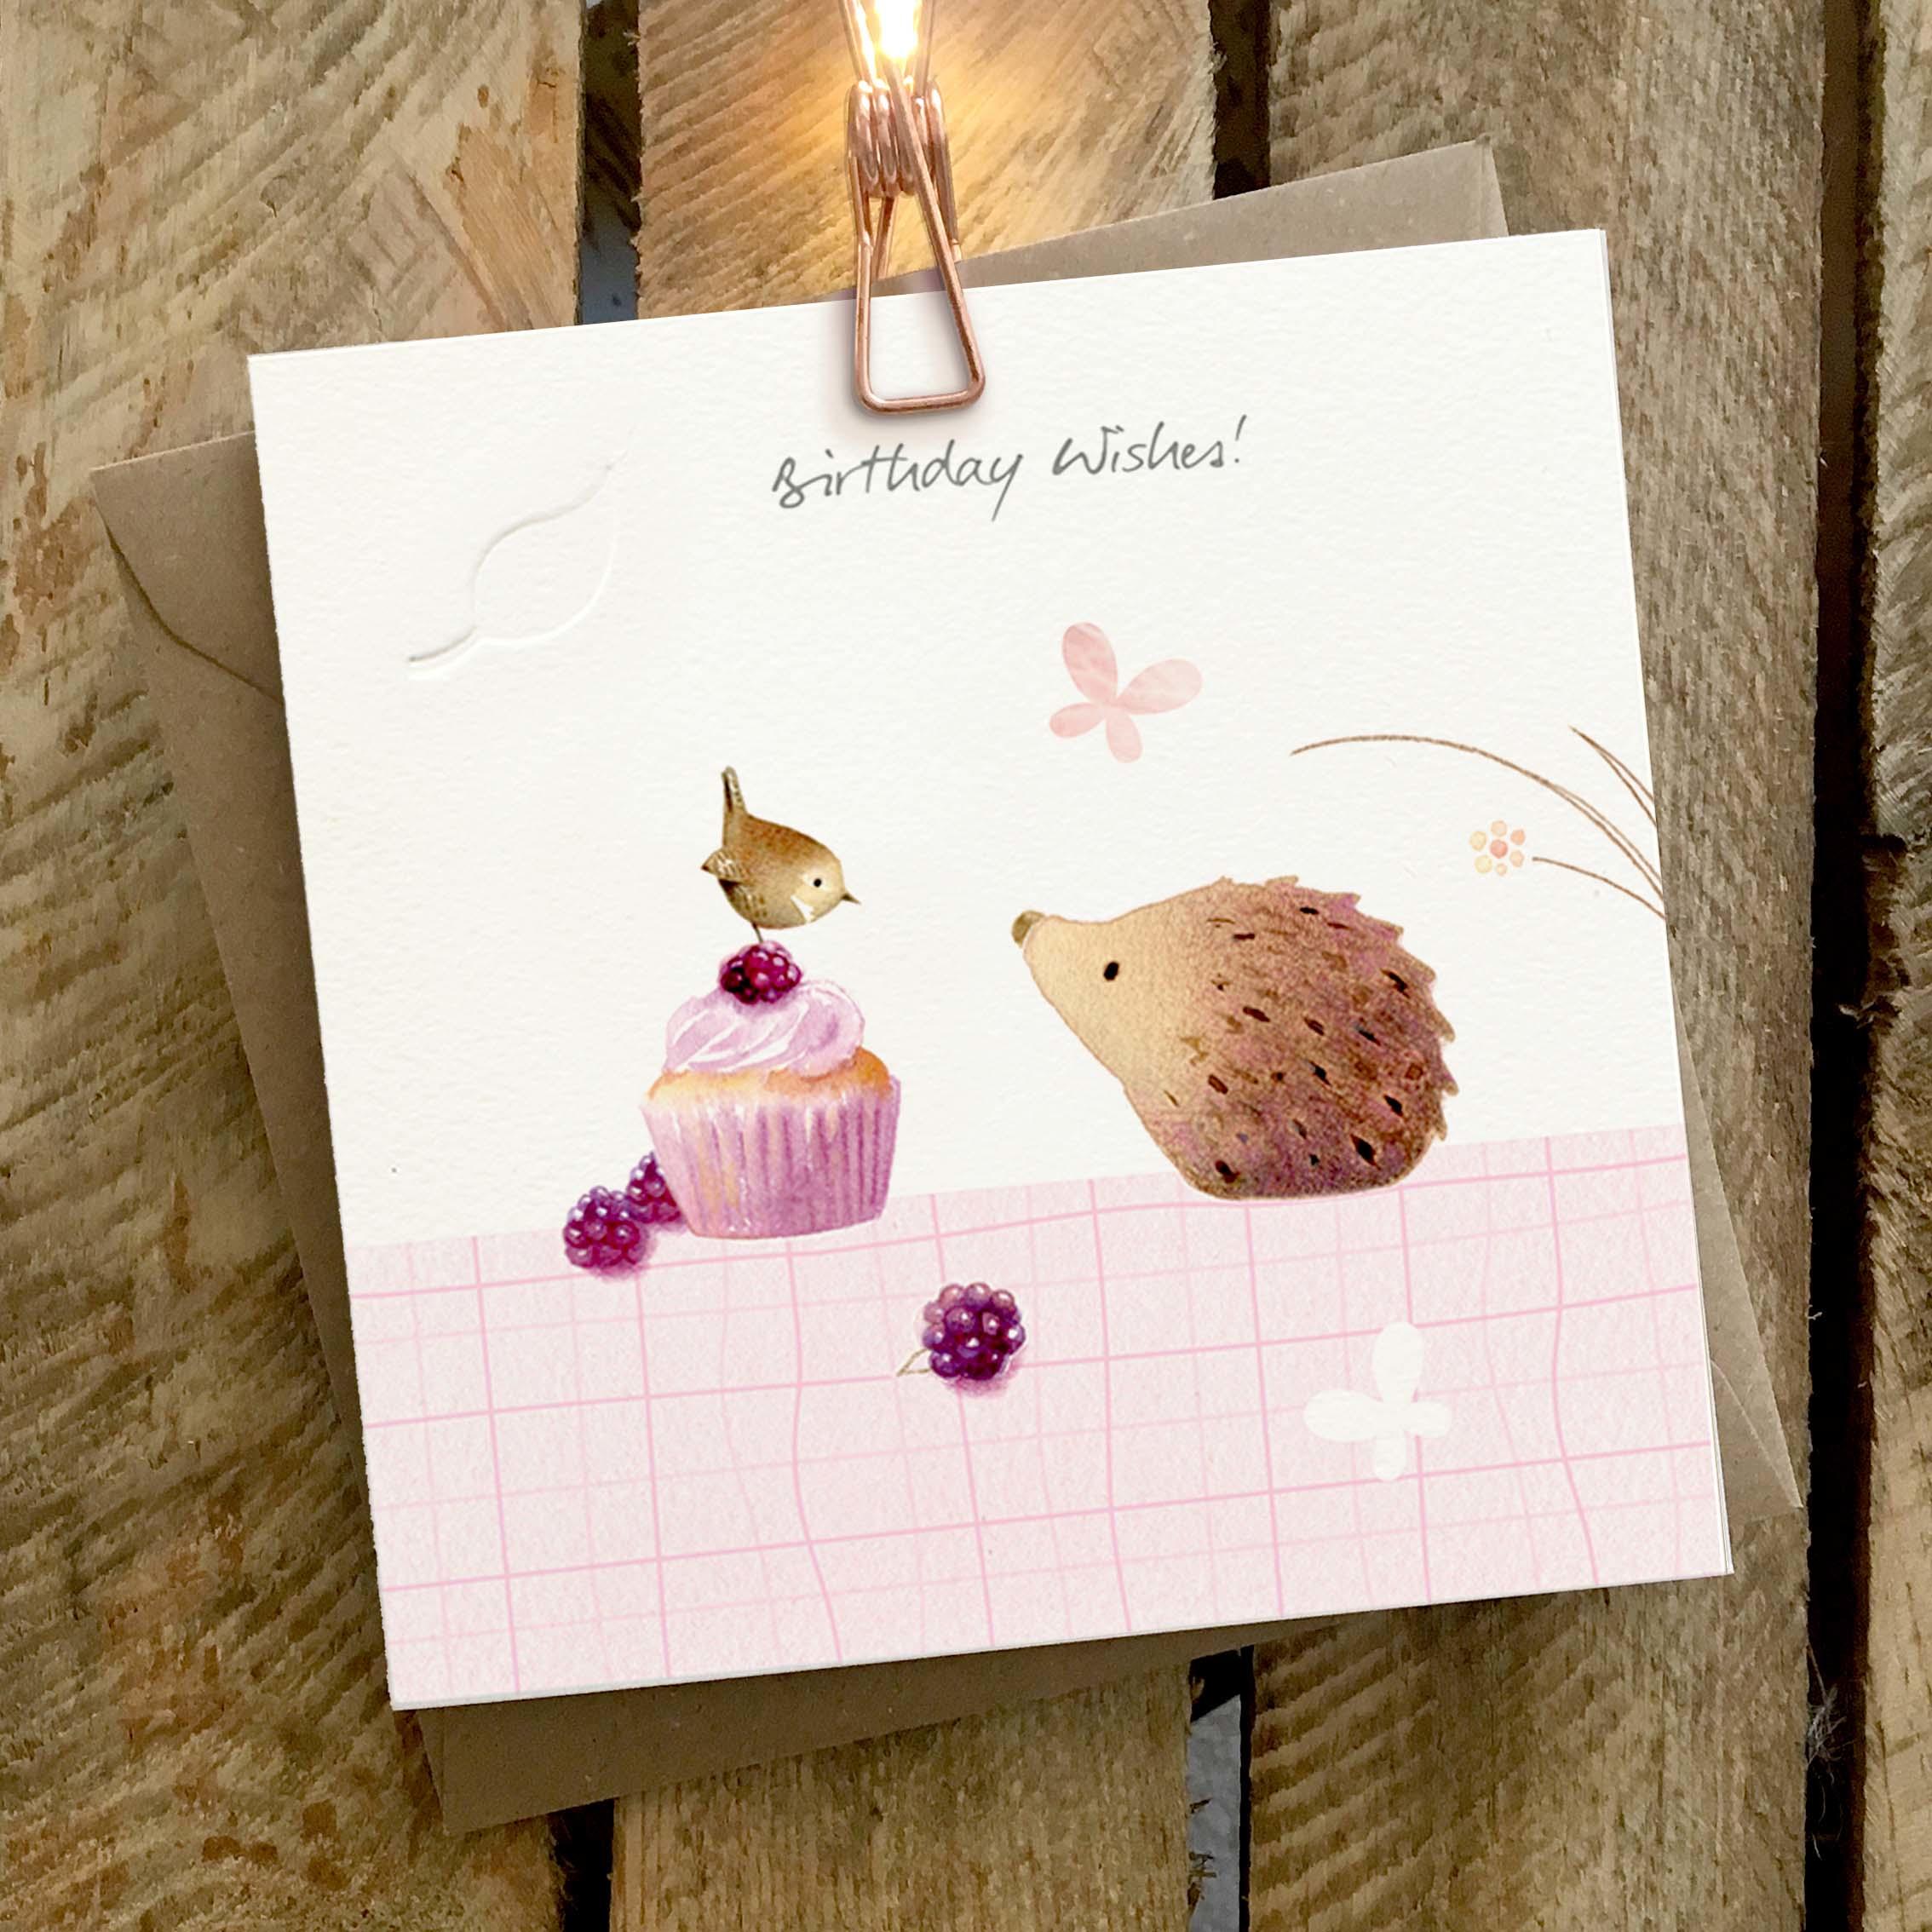 Card featuring a cute hedgehog with a bird sitting on top of a blackberry muffin.